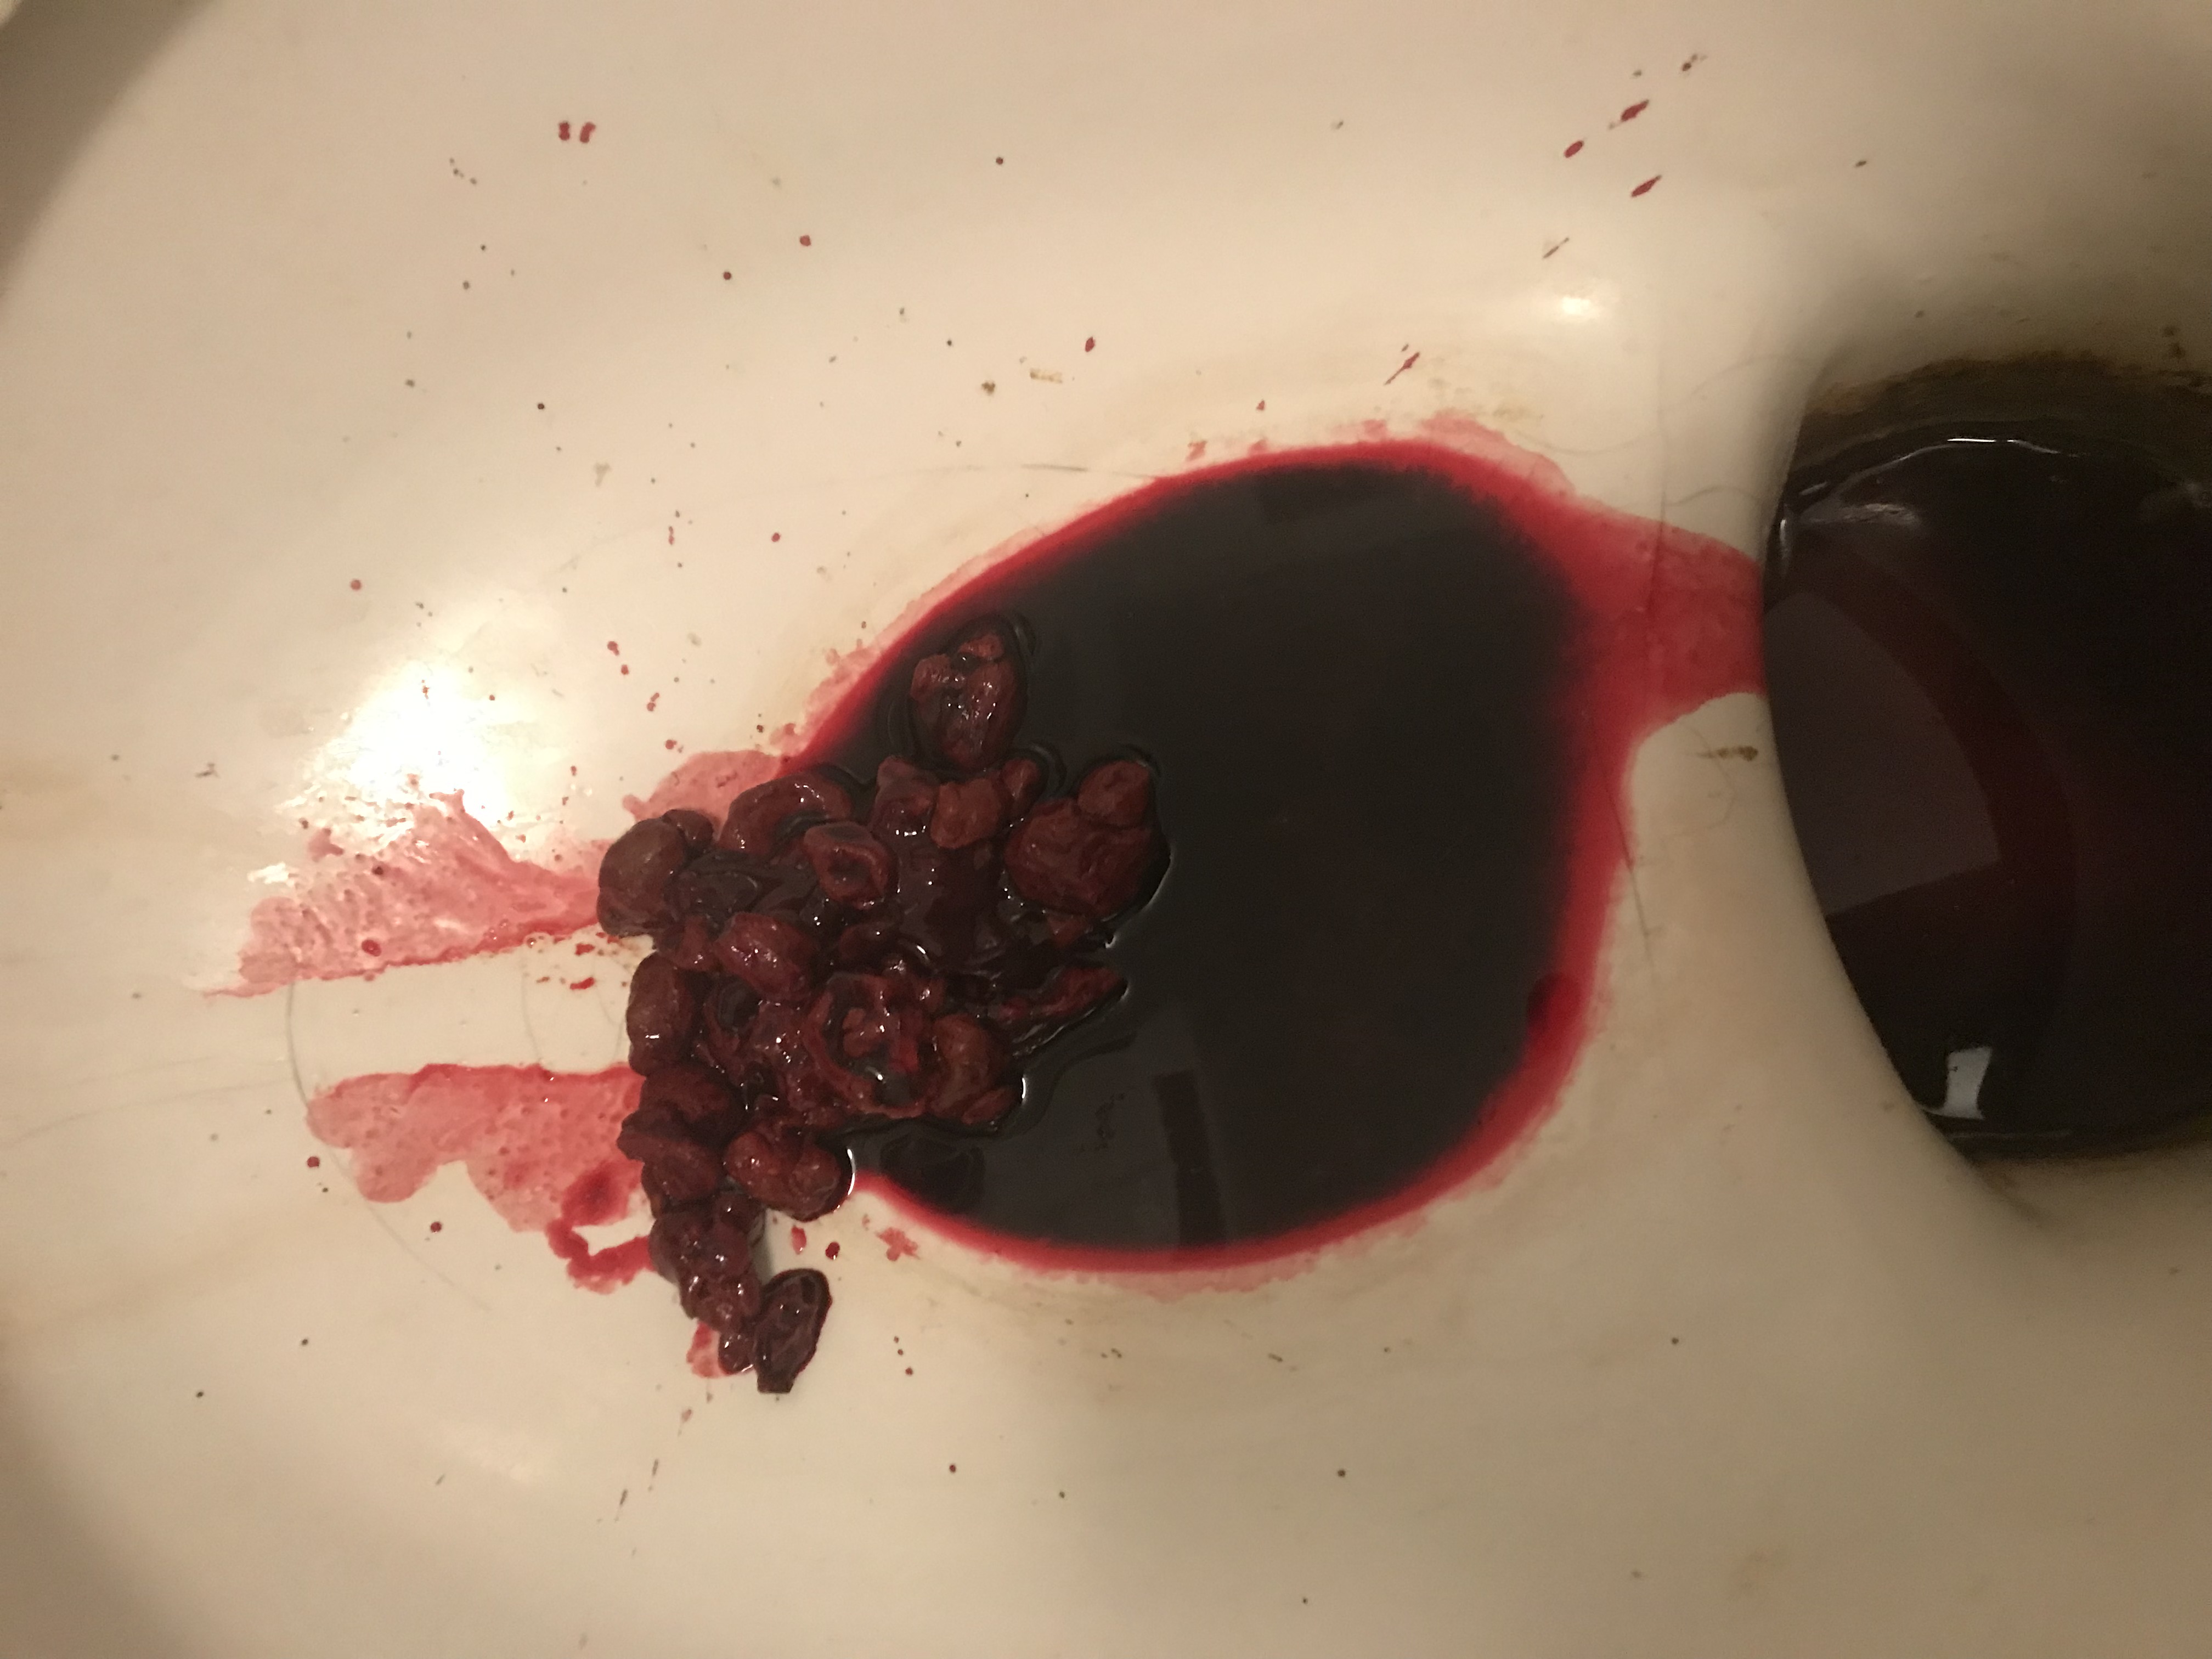 Bloody urine in a toilet bowl.